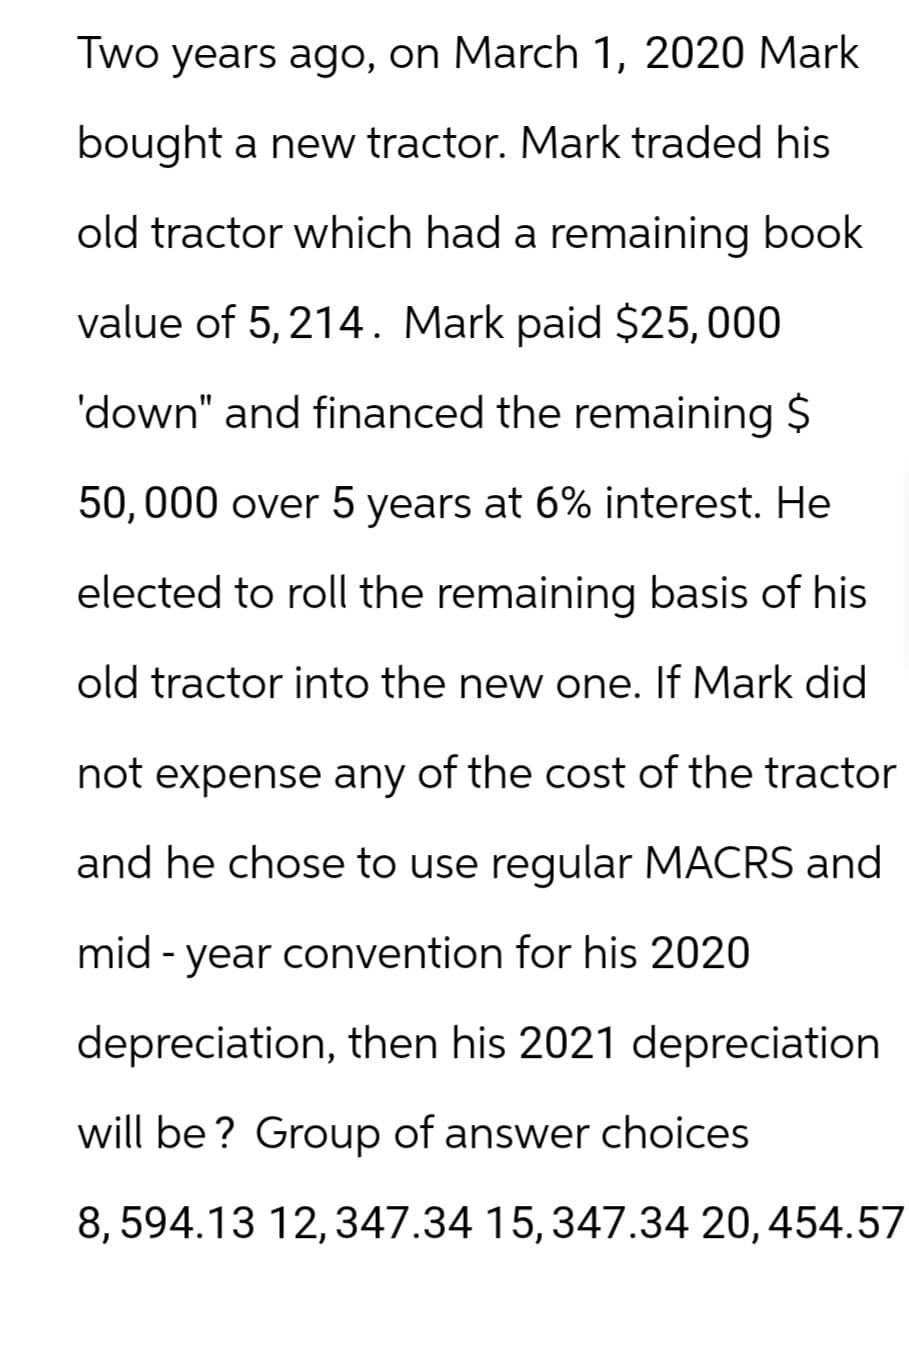 Two years ago, on March 1, 2020 Mark
bought a new tractor. Mark traded his
old tractor which had a remaining book
value of 5,214. Mark paid $25,000
'down" and financed the remaining $
50,000 over 5 years at 6% interest. He
elected to roll the remaining basis of his
old tractor into the new one. If Mark did
not expense any of the cost of the tractor
and he chose to use regular MACRS and
mid-year convention for his 2020
depreciation, then his 2021 depreciation
will be? Group of answer choices.
8,594.13 12,347.34 15, 347.34 20, 454.57